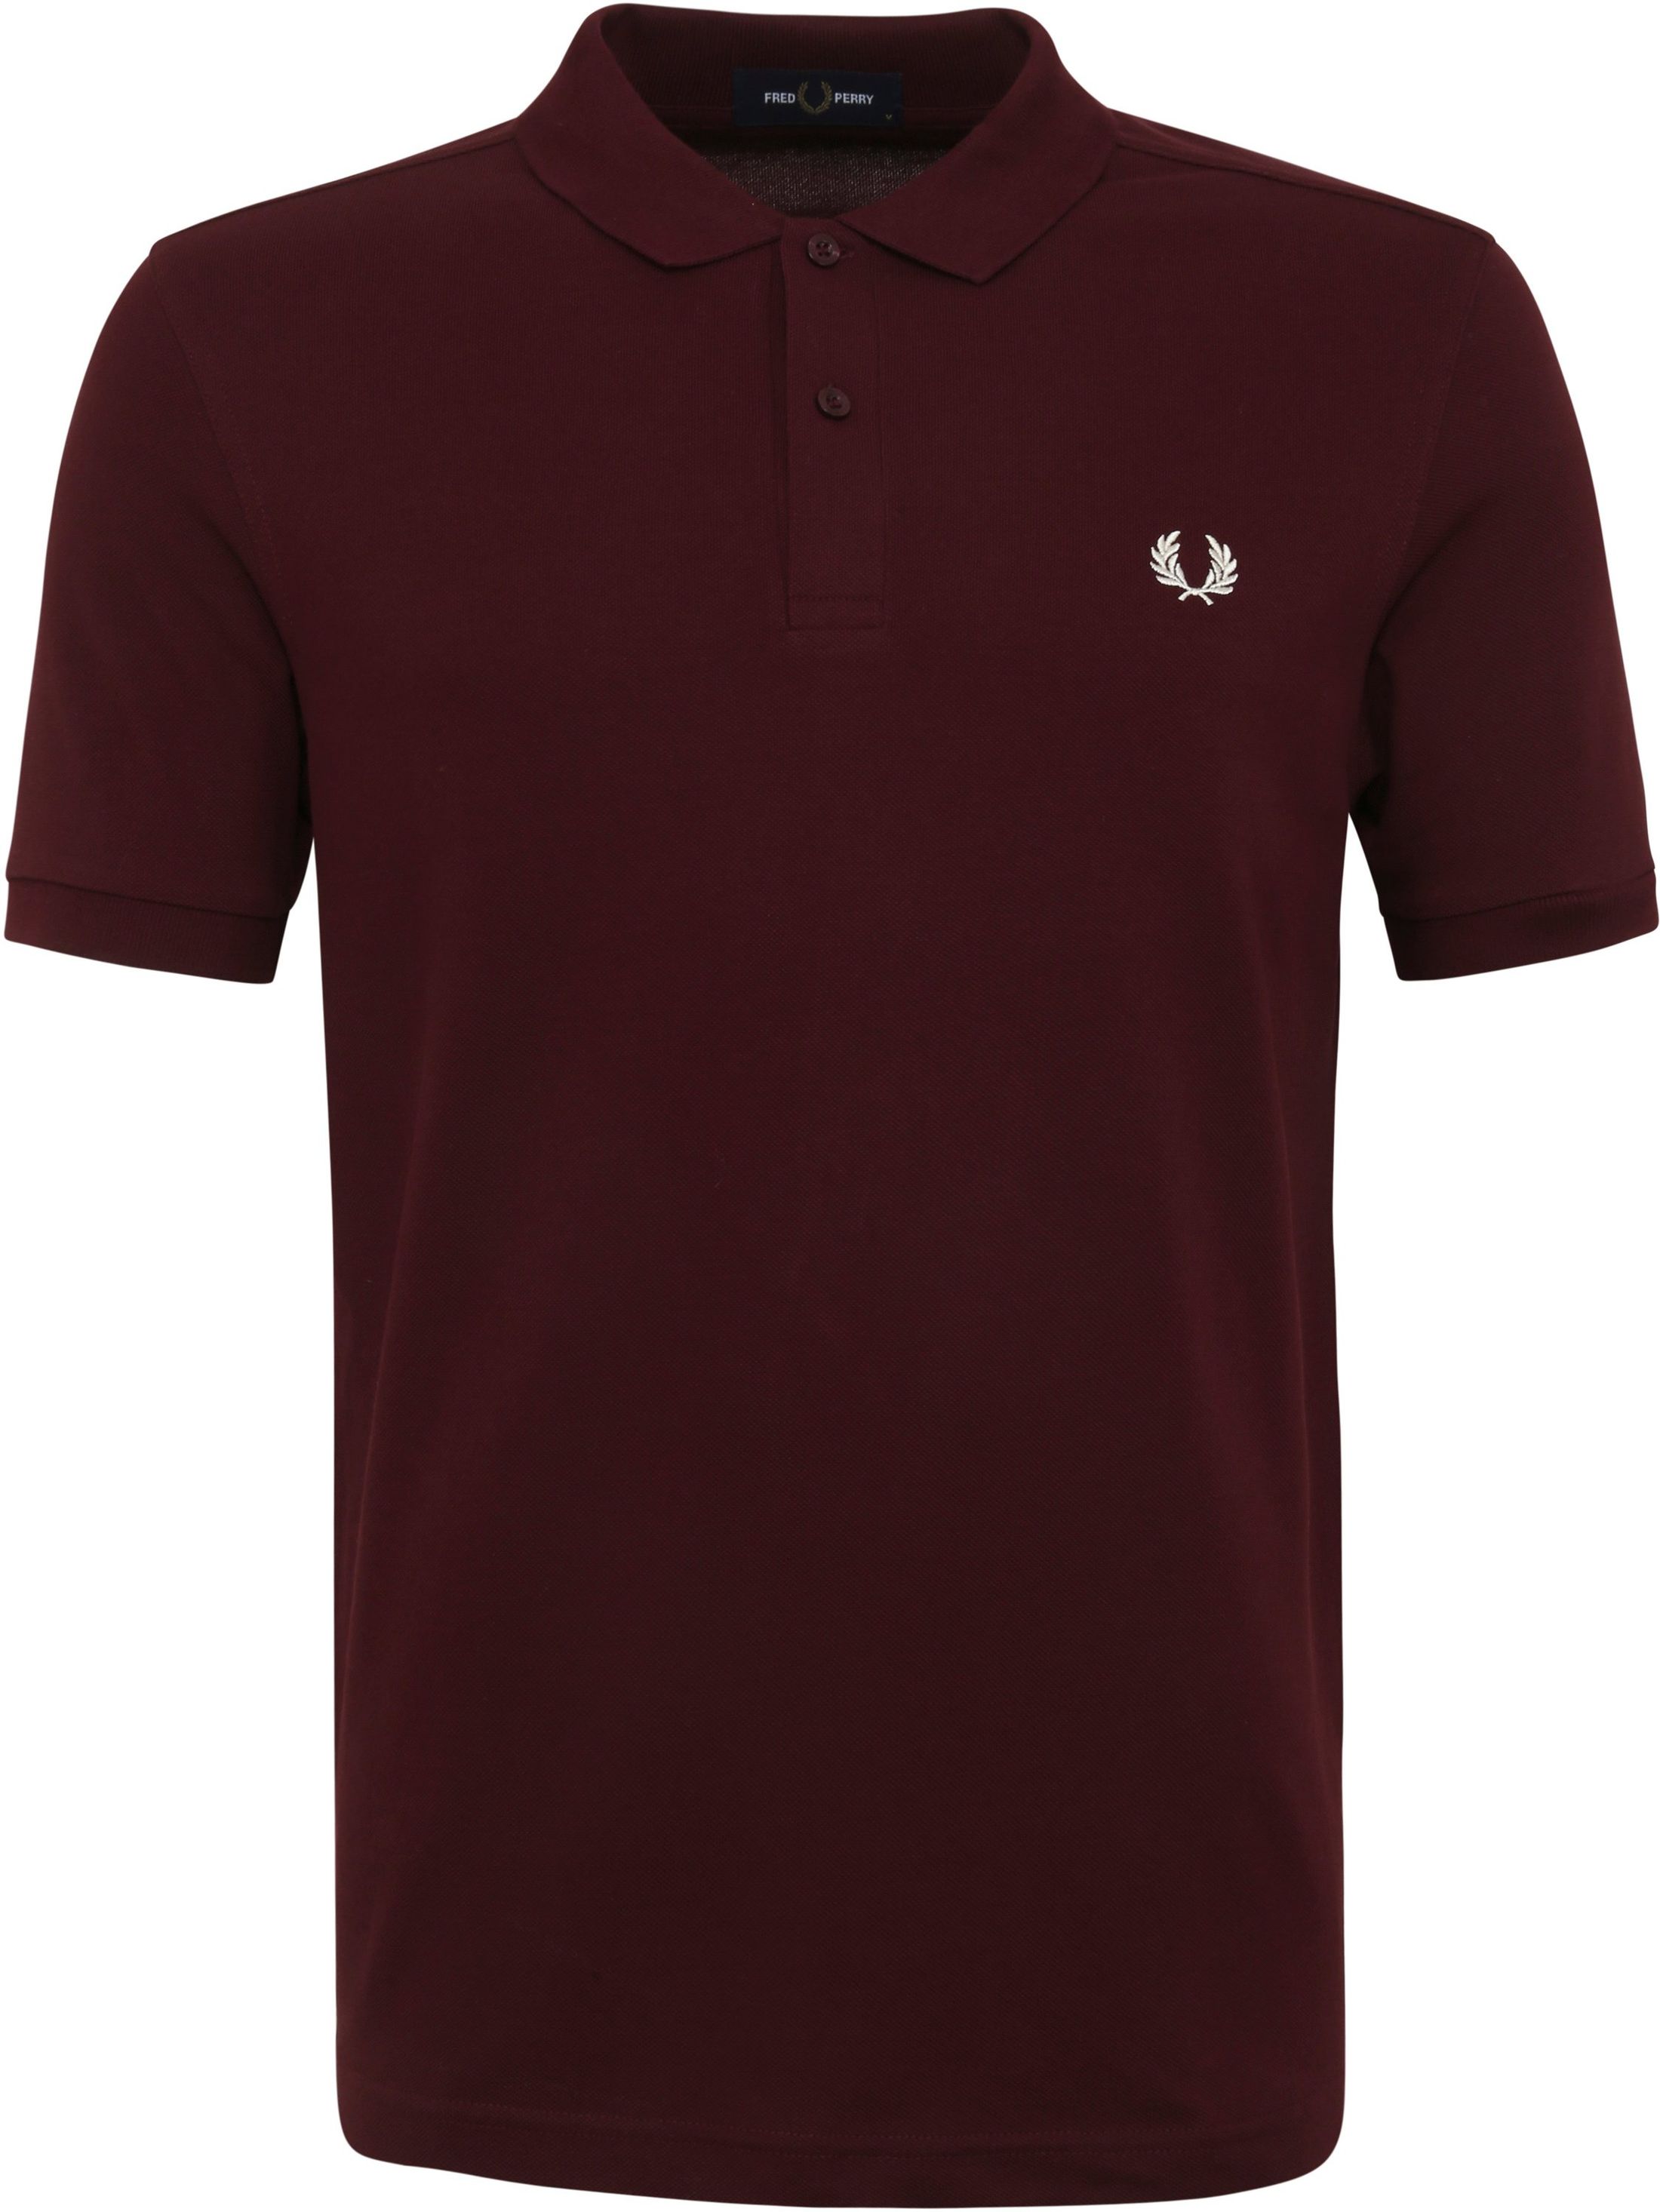 Fred Perry Bordeaux Polo  Burgundy size L